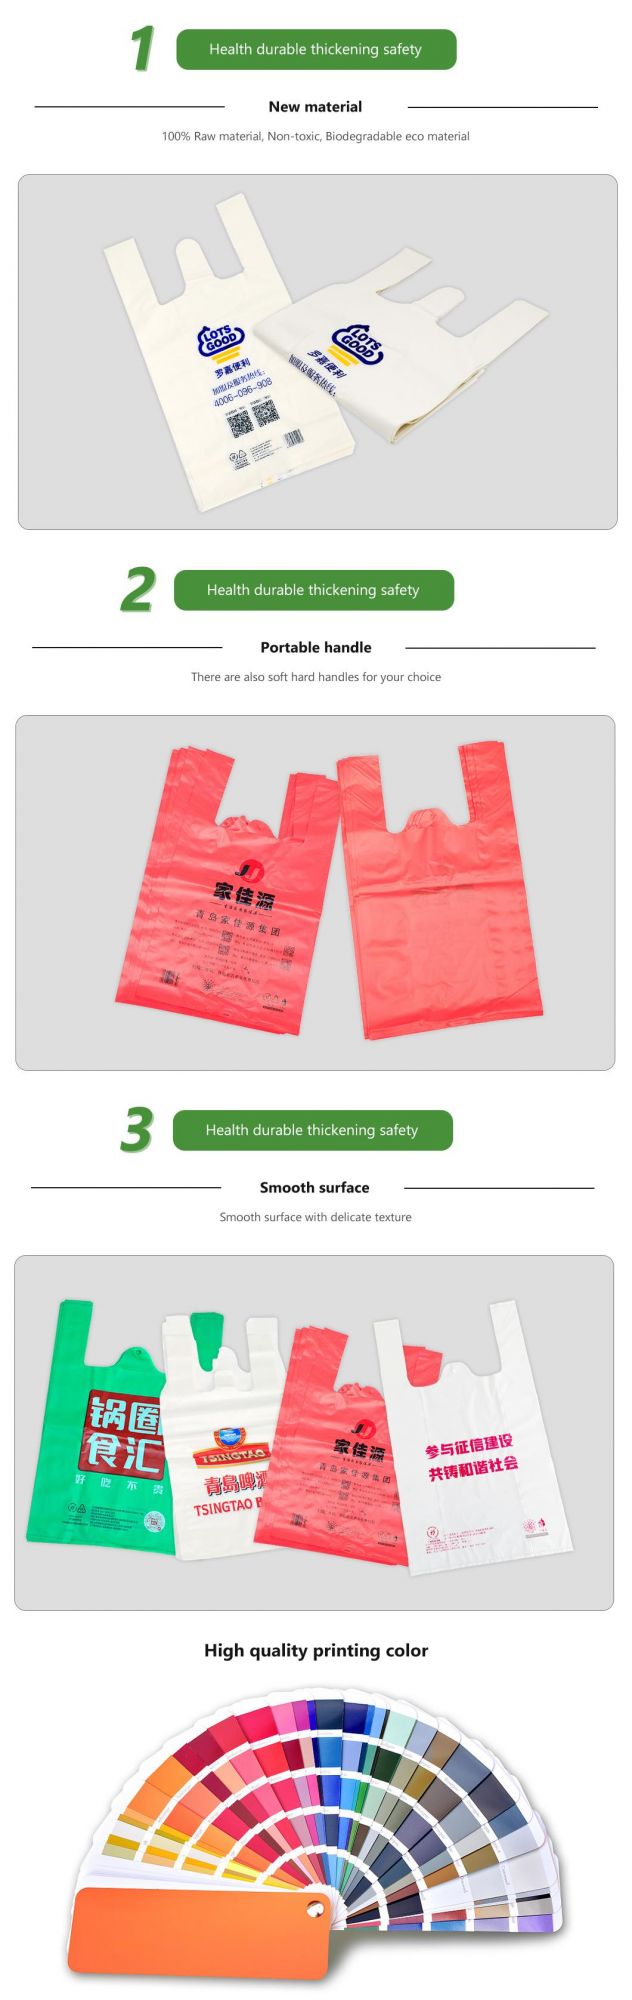 100% Biodegradable Compostable Bags/T-Shirt Bags/Vest Bags/Shopping Bags/Supermarket Bags/Carrier Bags/Grocery Bags/Take-out Bags Manufacturer with Custom Logo